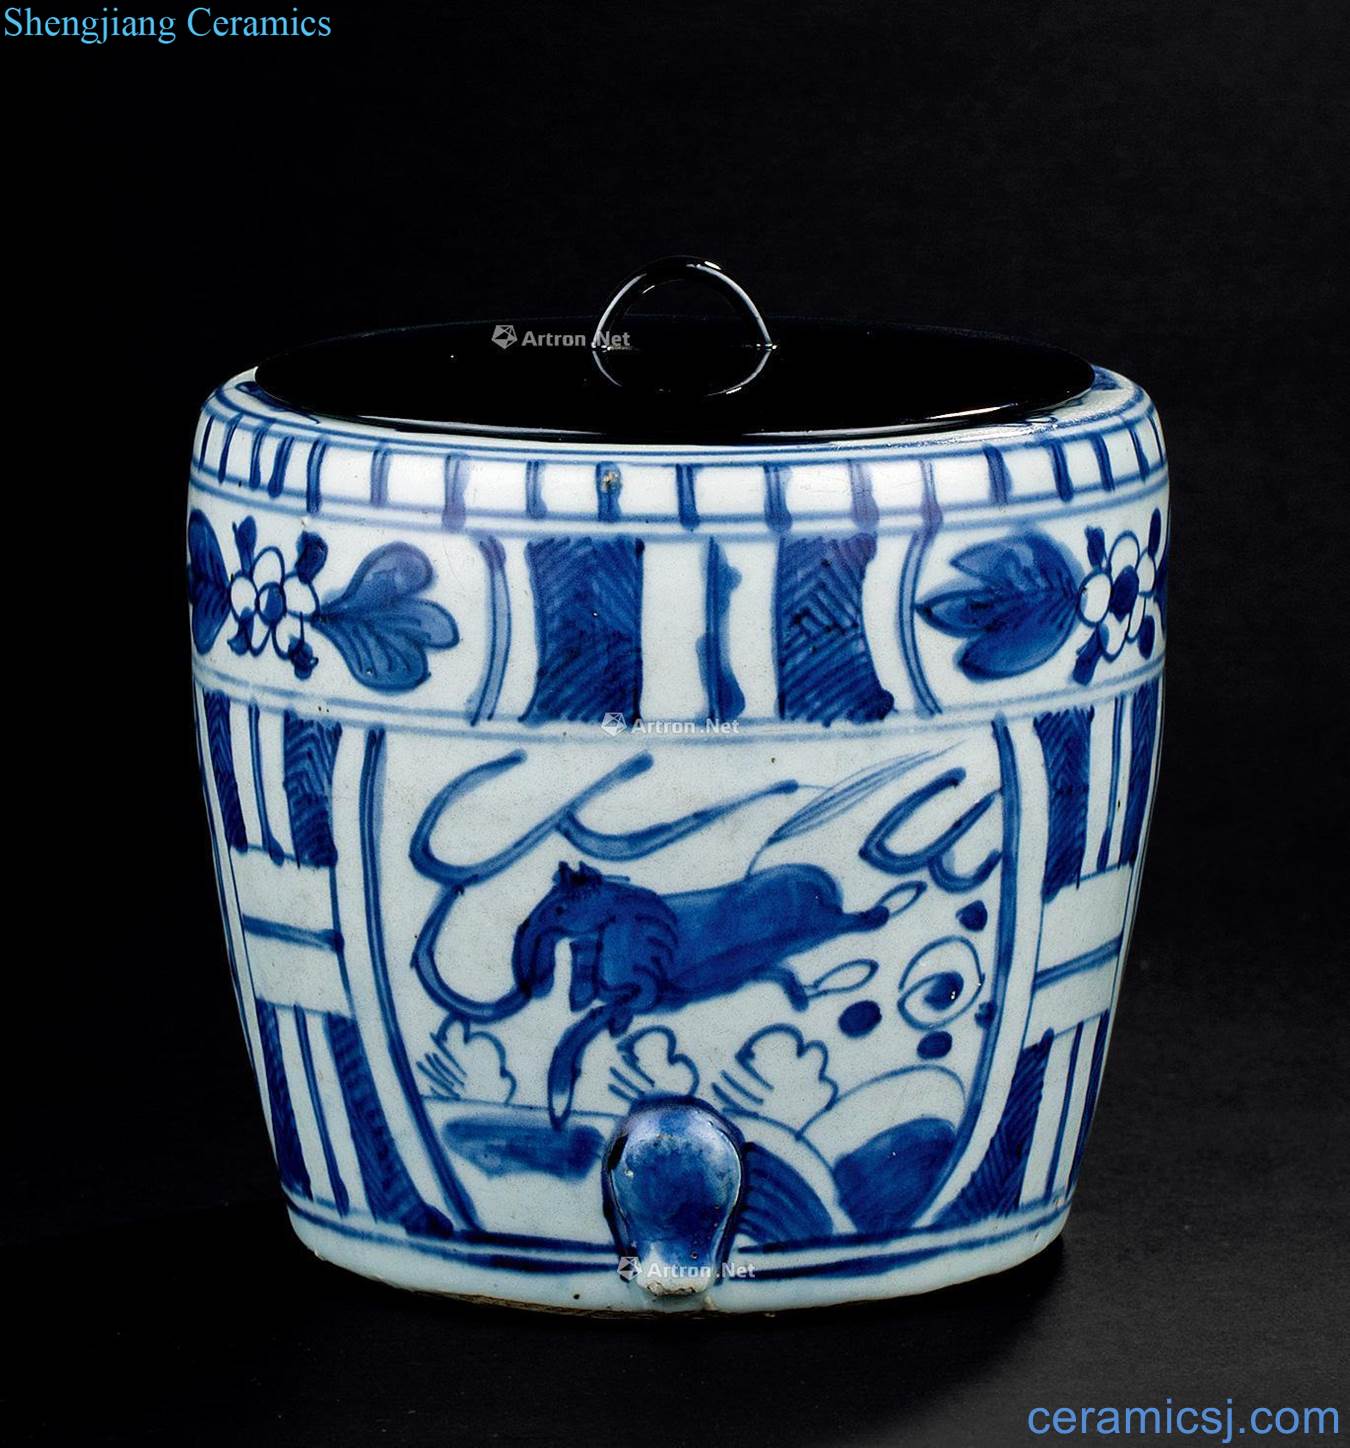 In the Ming dynasty (1368-1644) blue and white horse medallion WenXiangLu